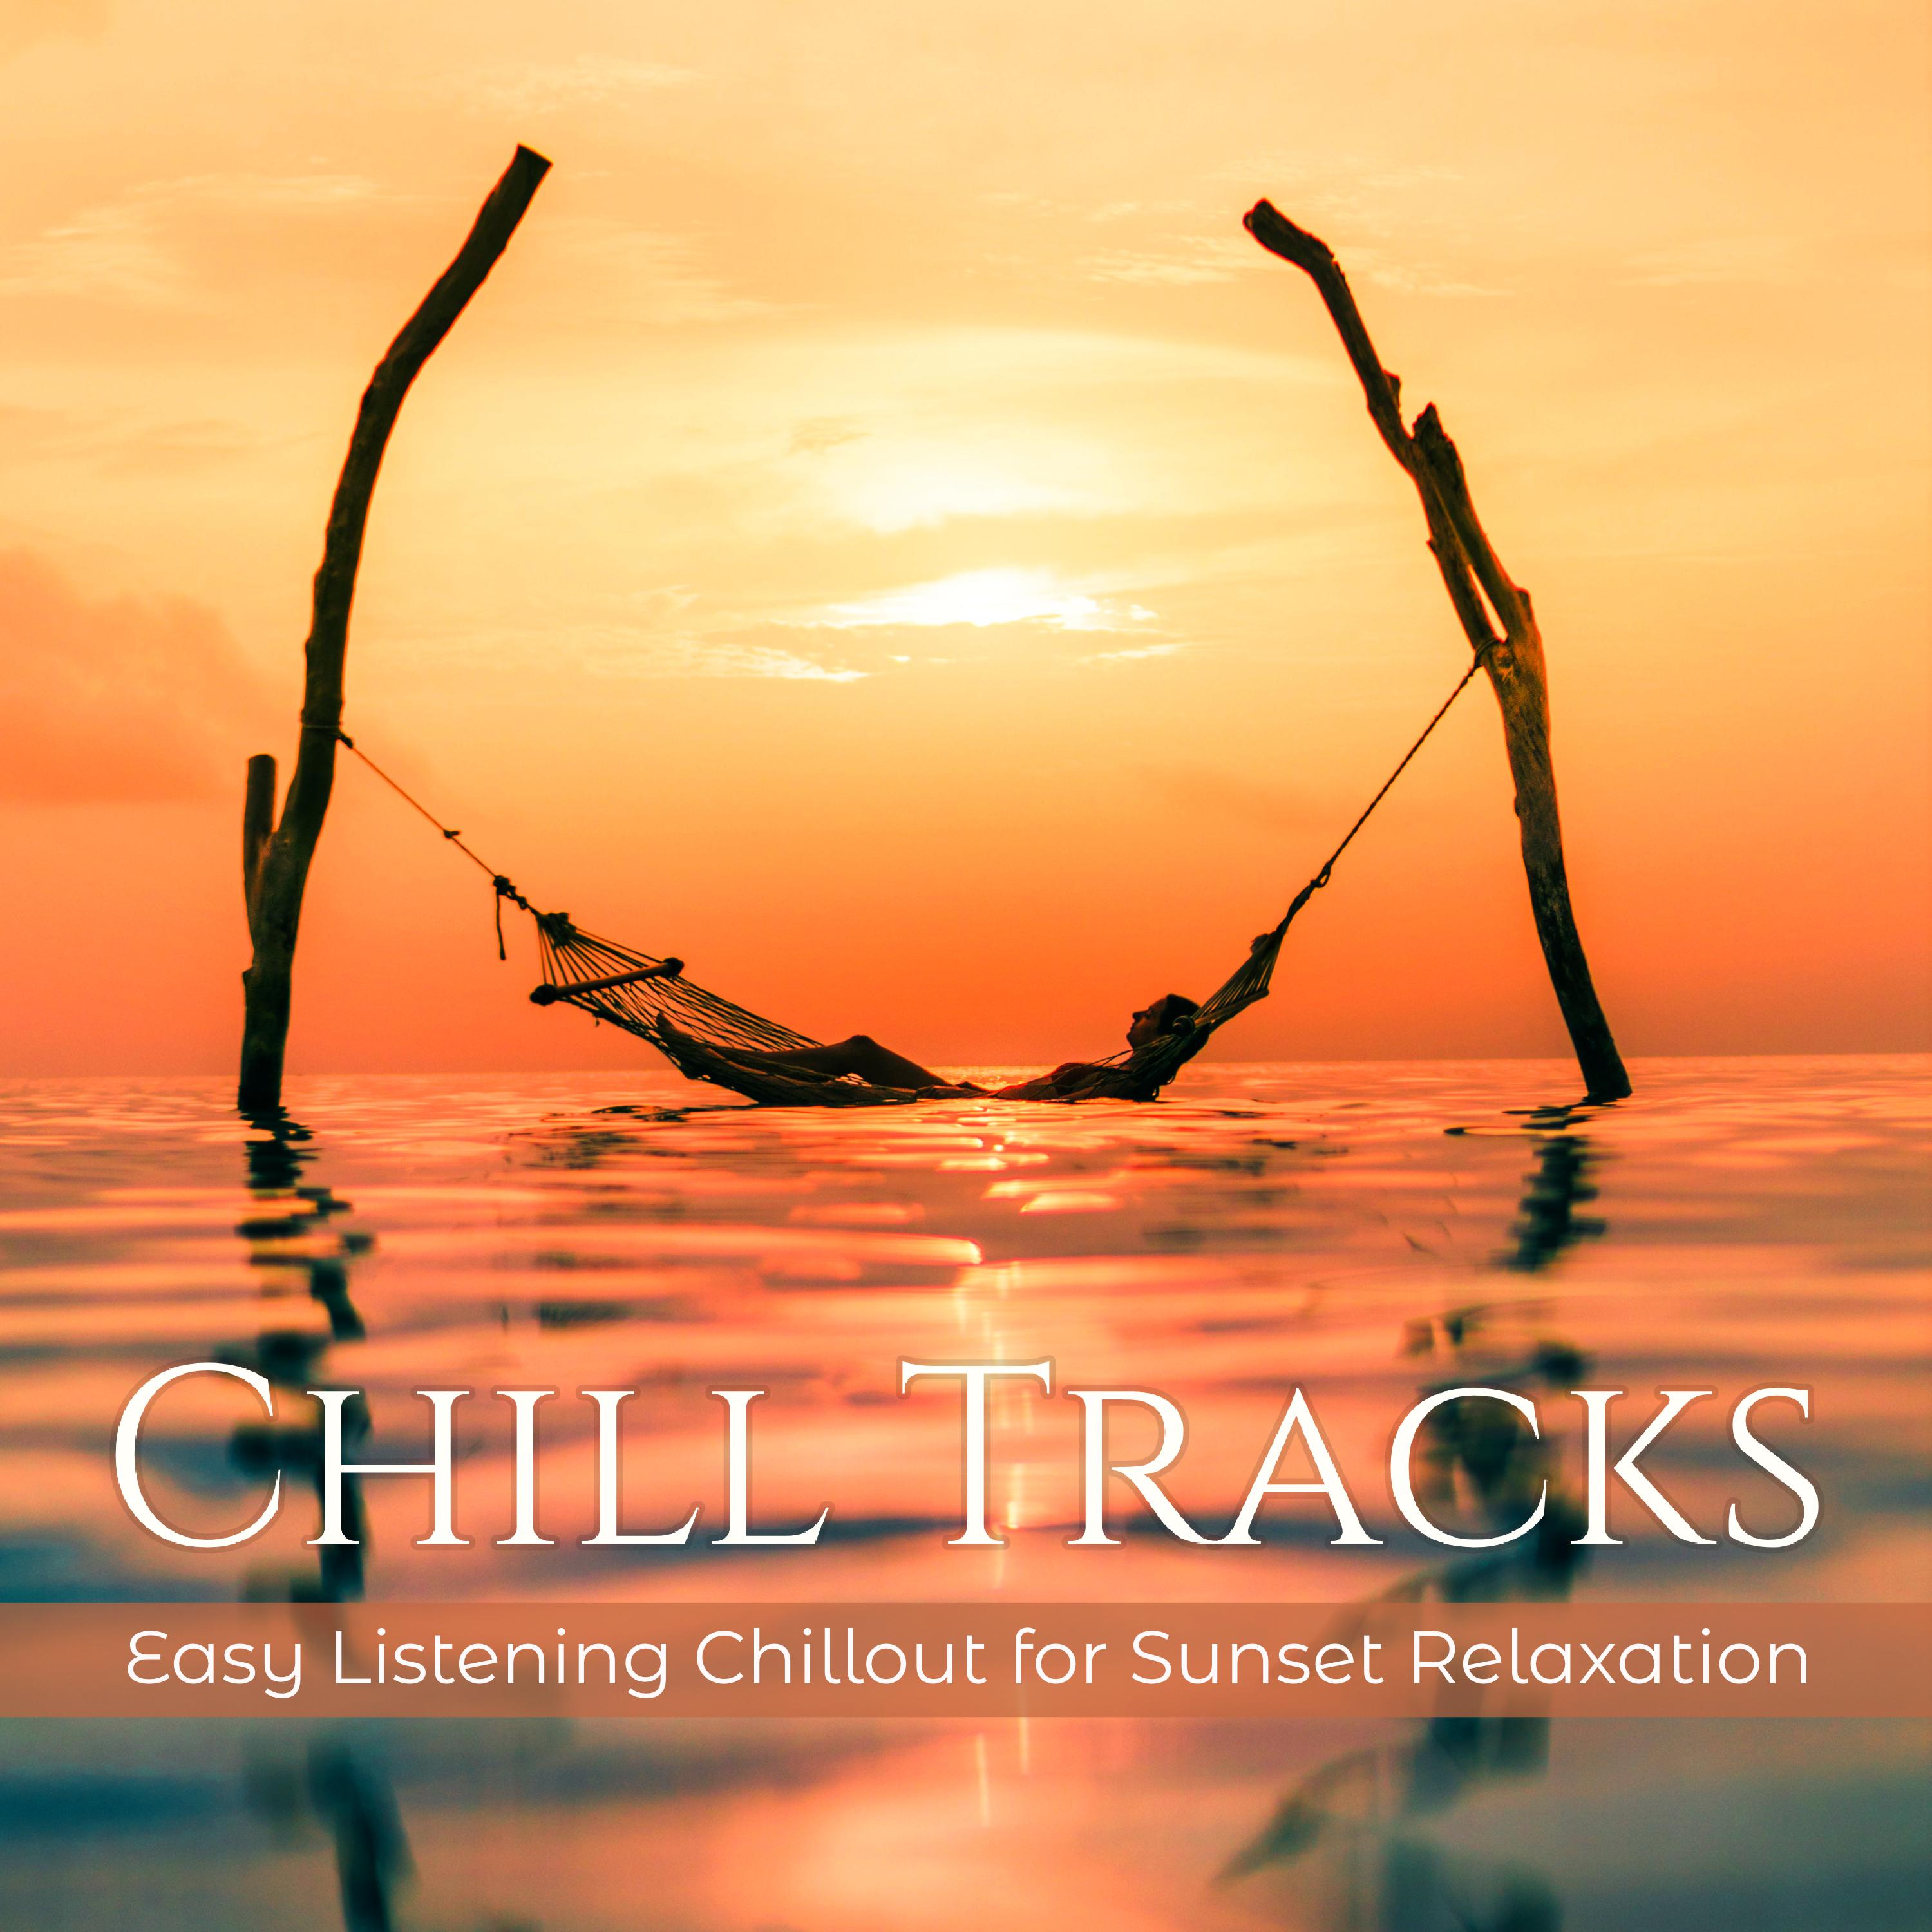 Reflections - Chill Out